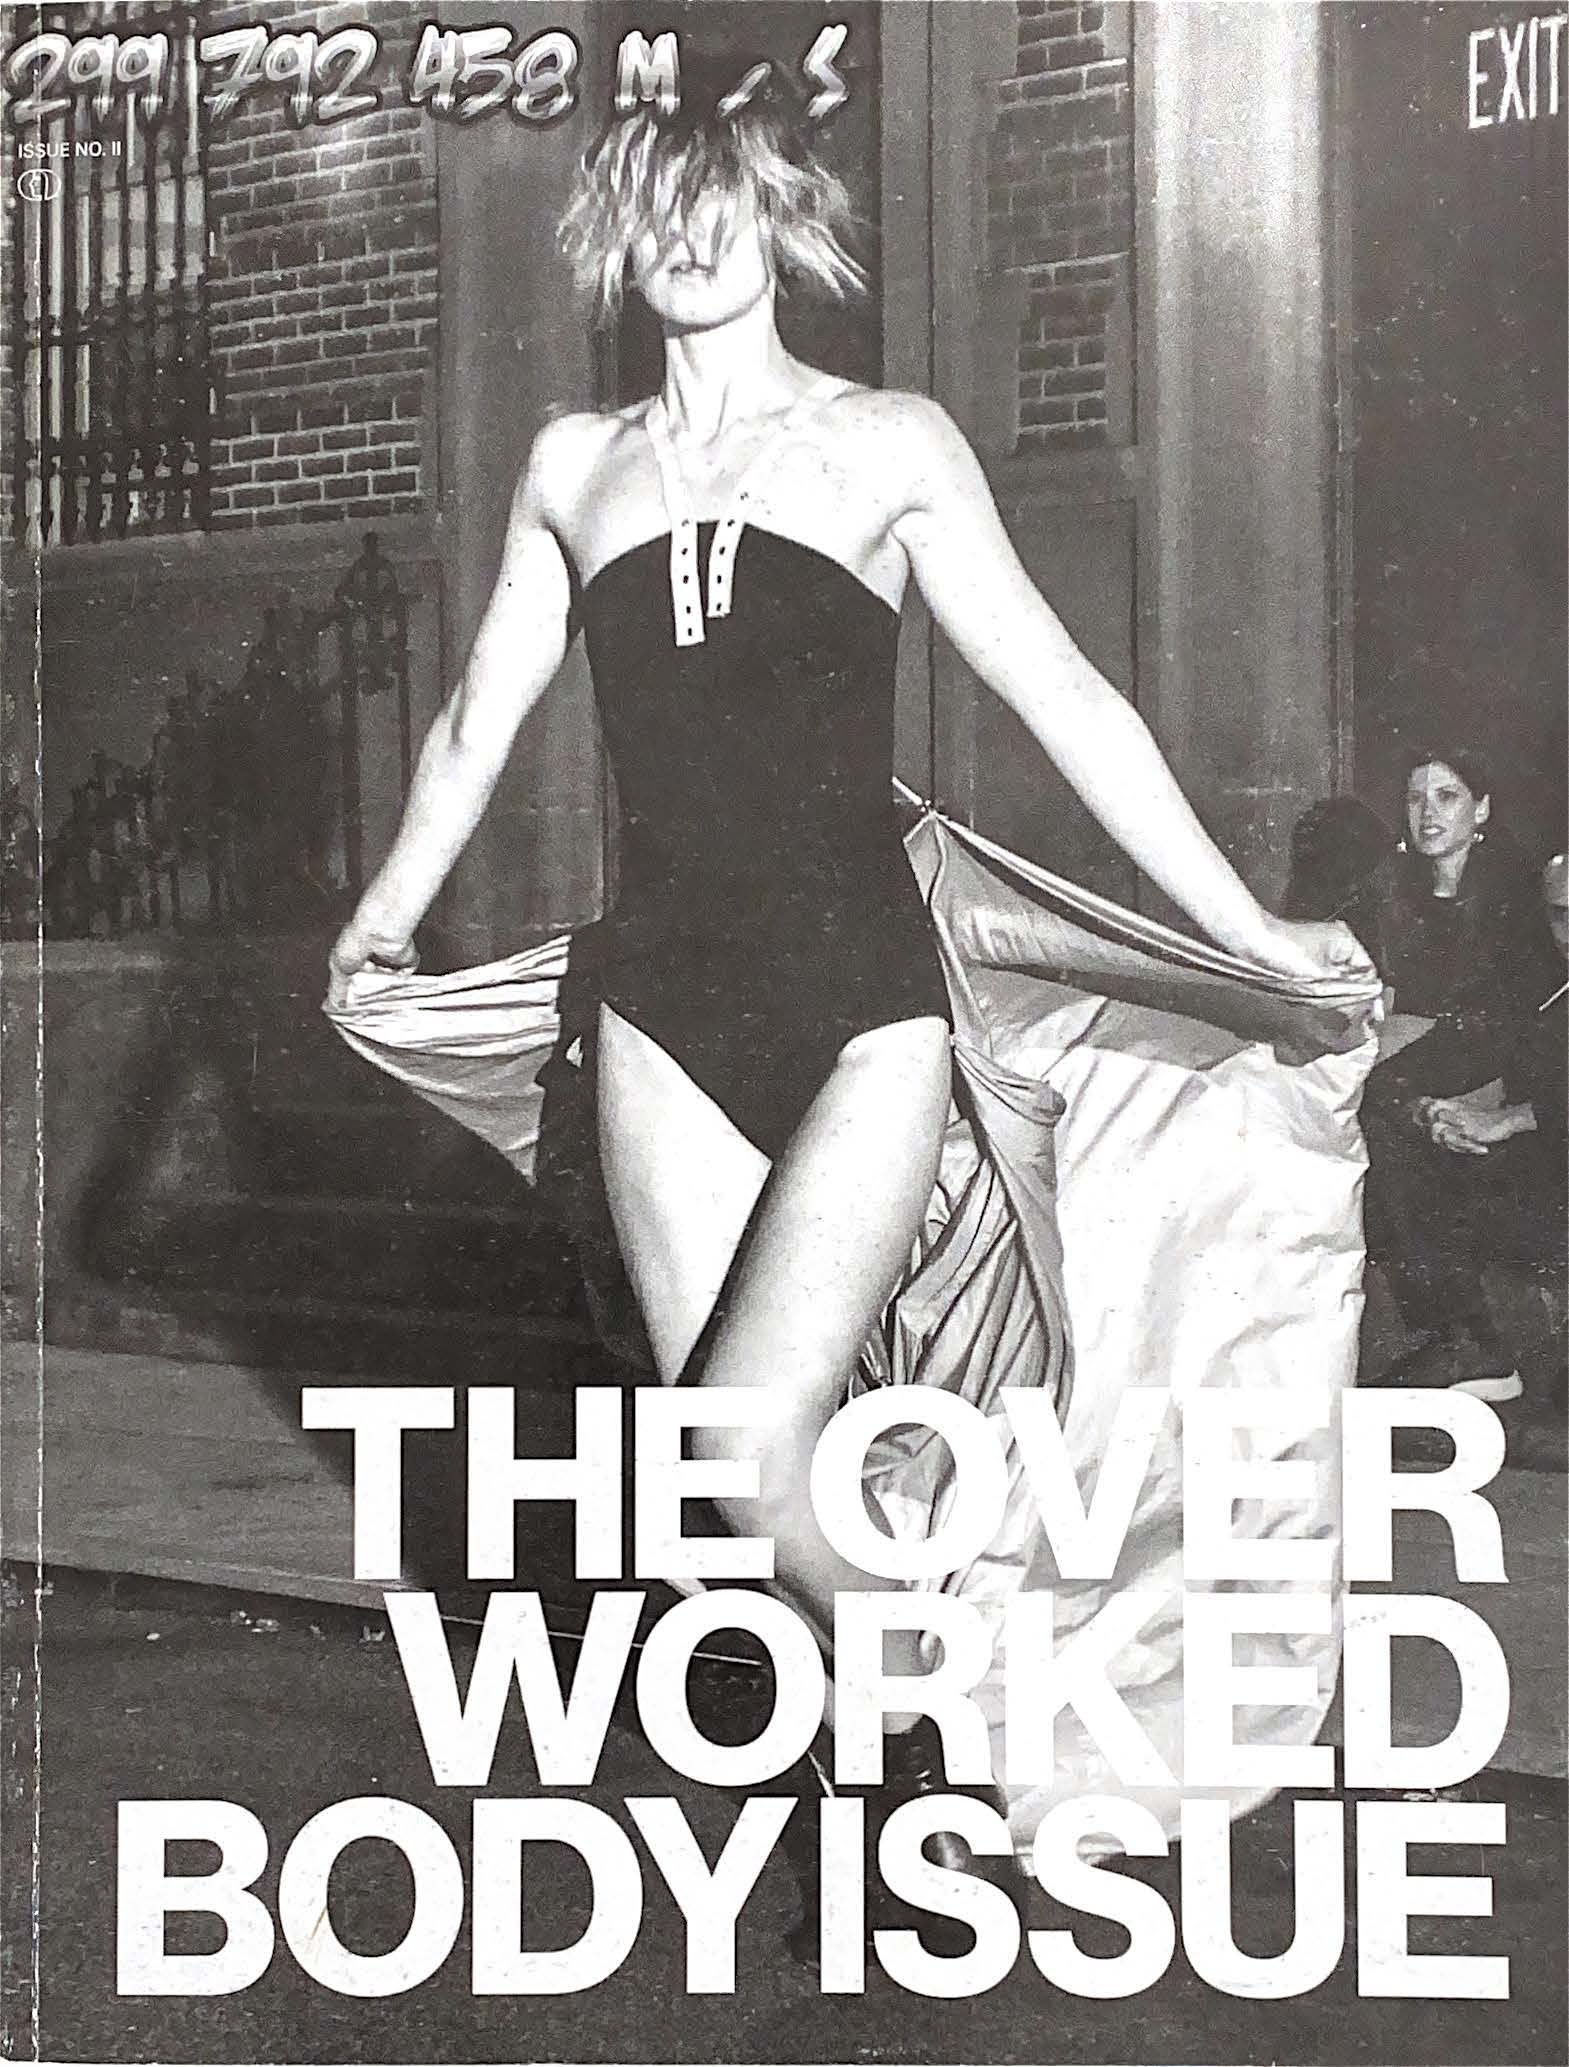 The Overworked Body Issue
299 792 458 M/S